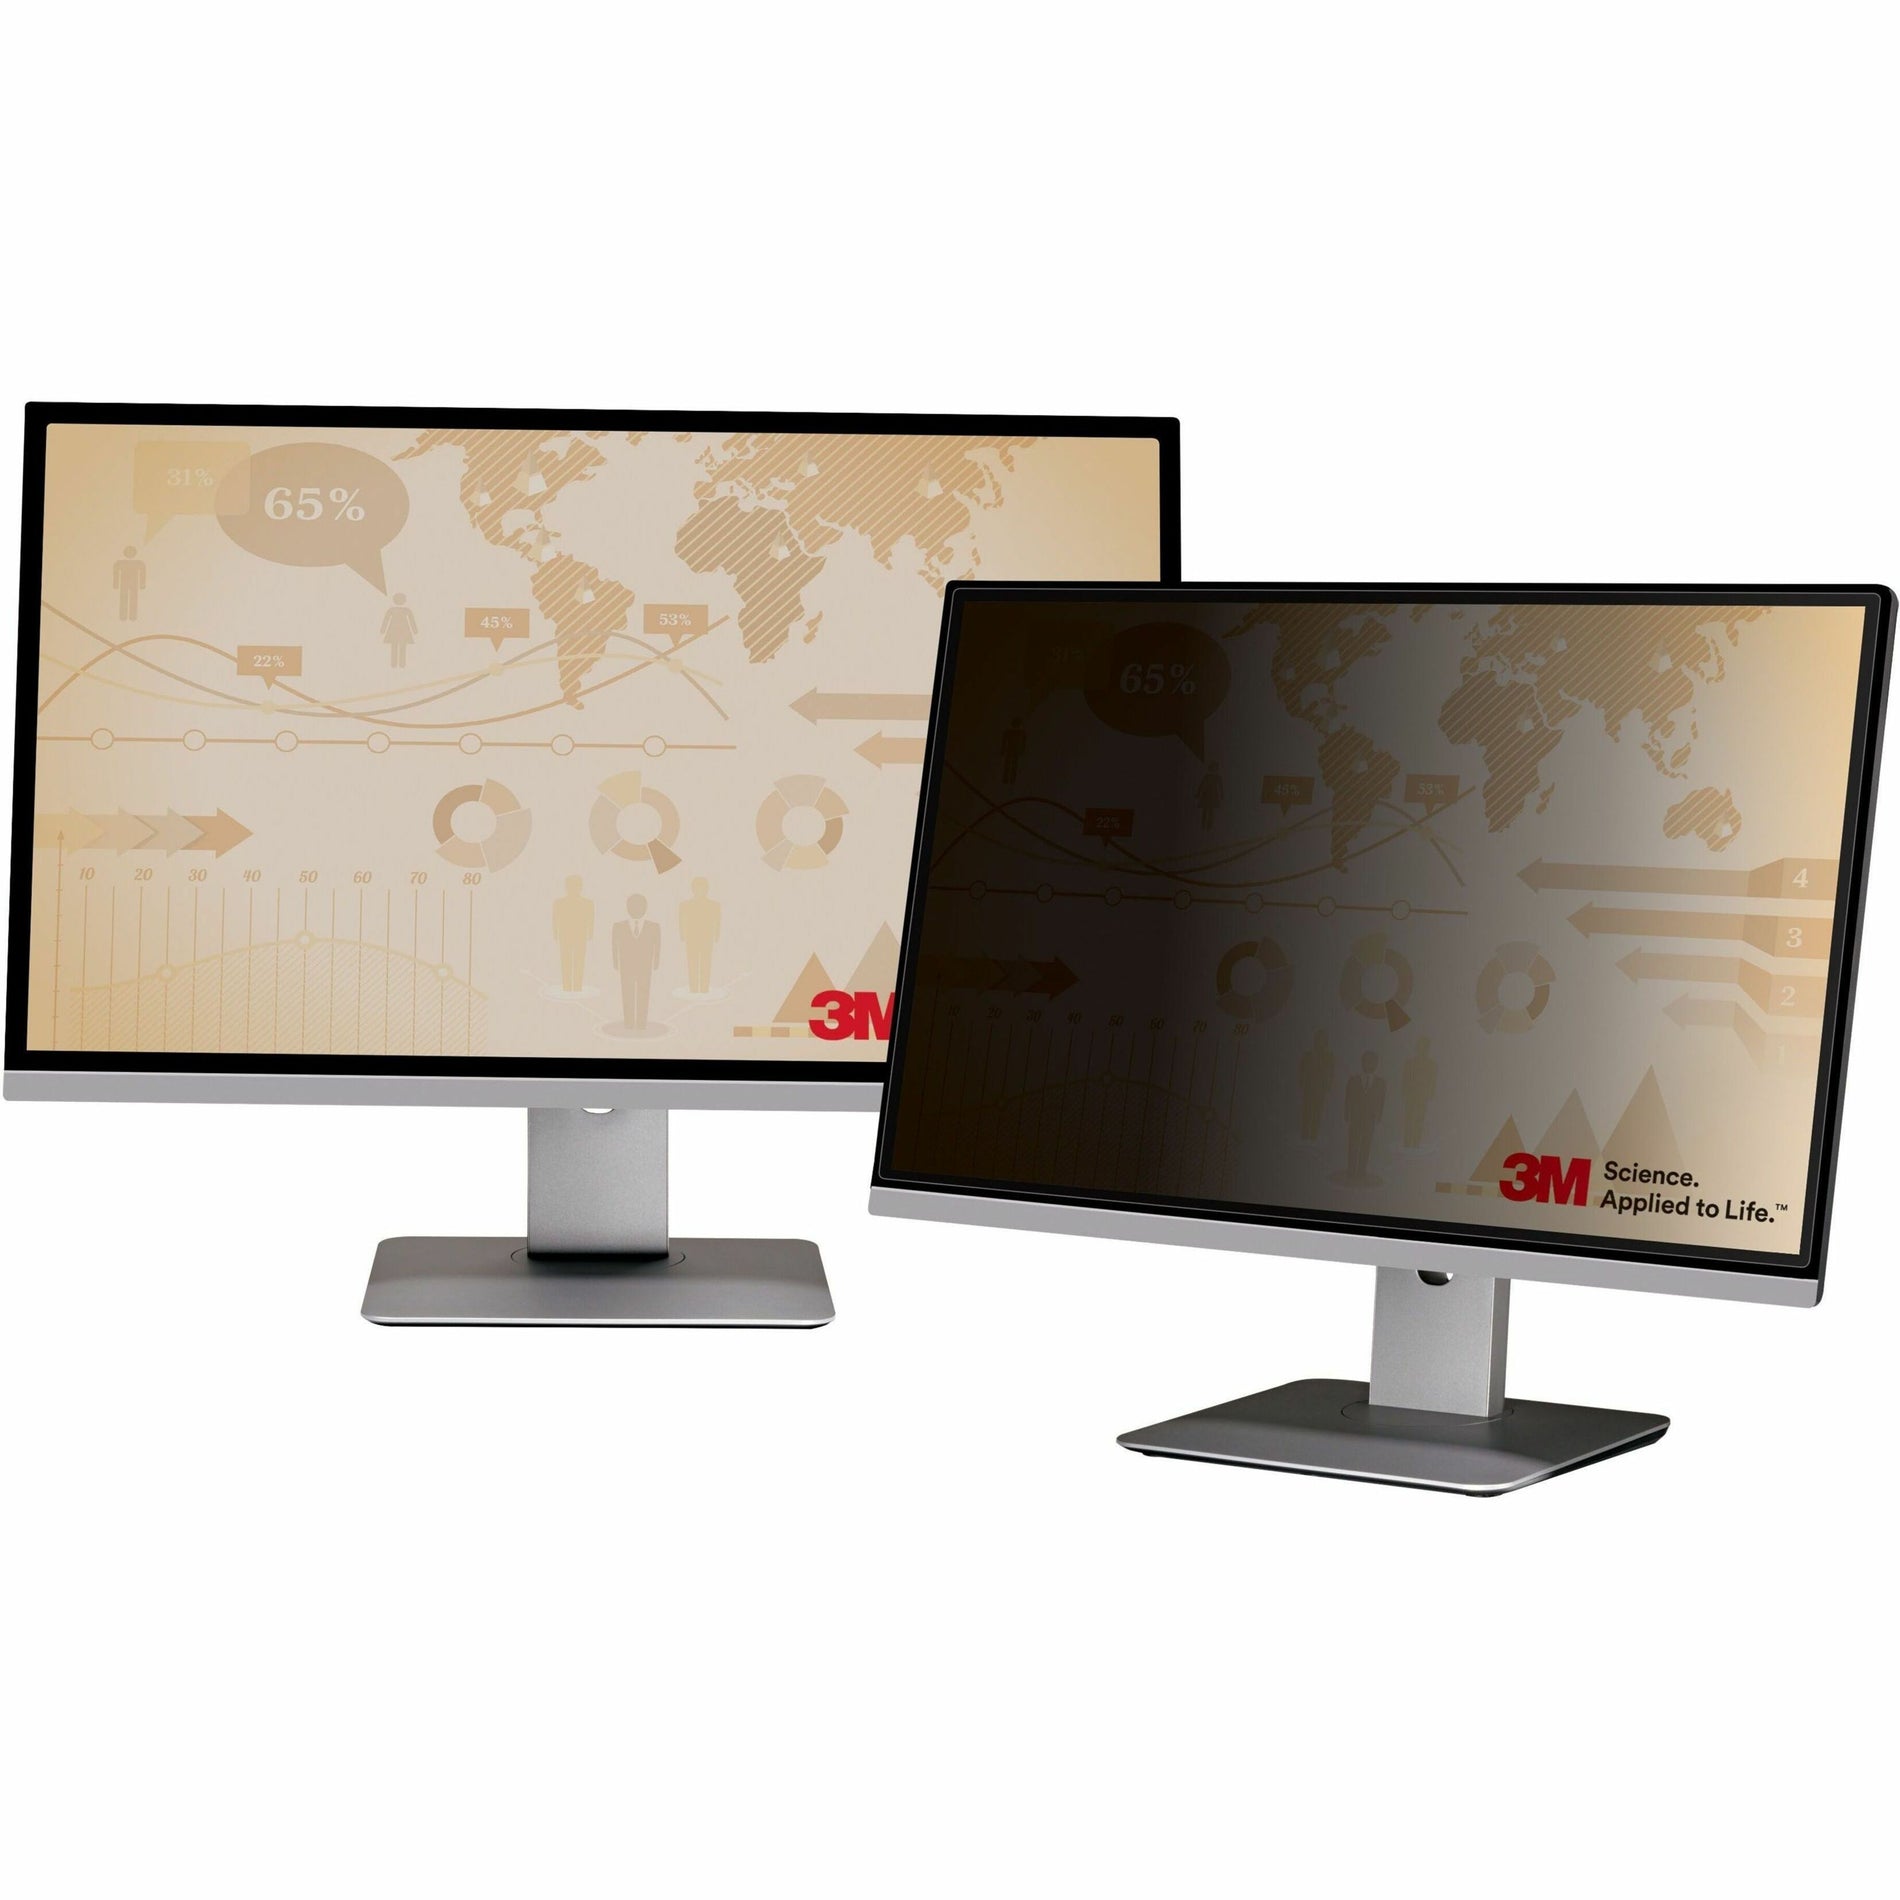 3M PF215W9P Privacy Filter for 21.5" Wide-screen Monitors, Reversible Glossy-to-Anti-glare, Limited Viewing Angle, Easy Clean